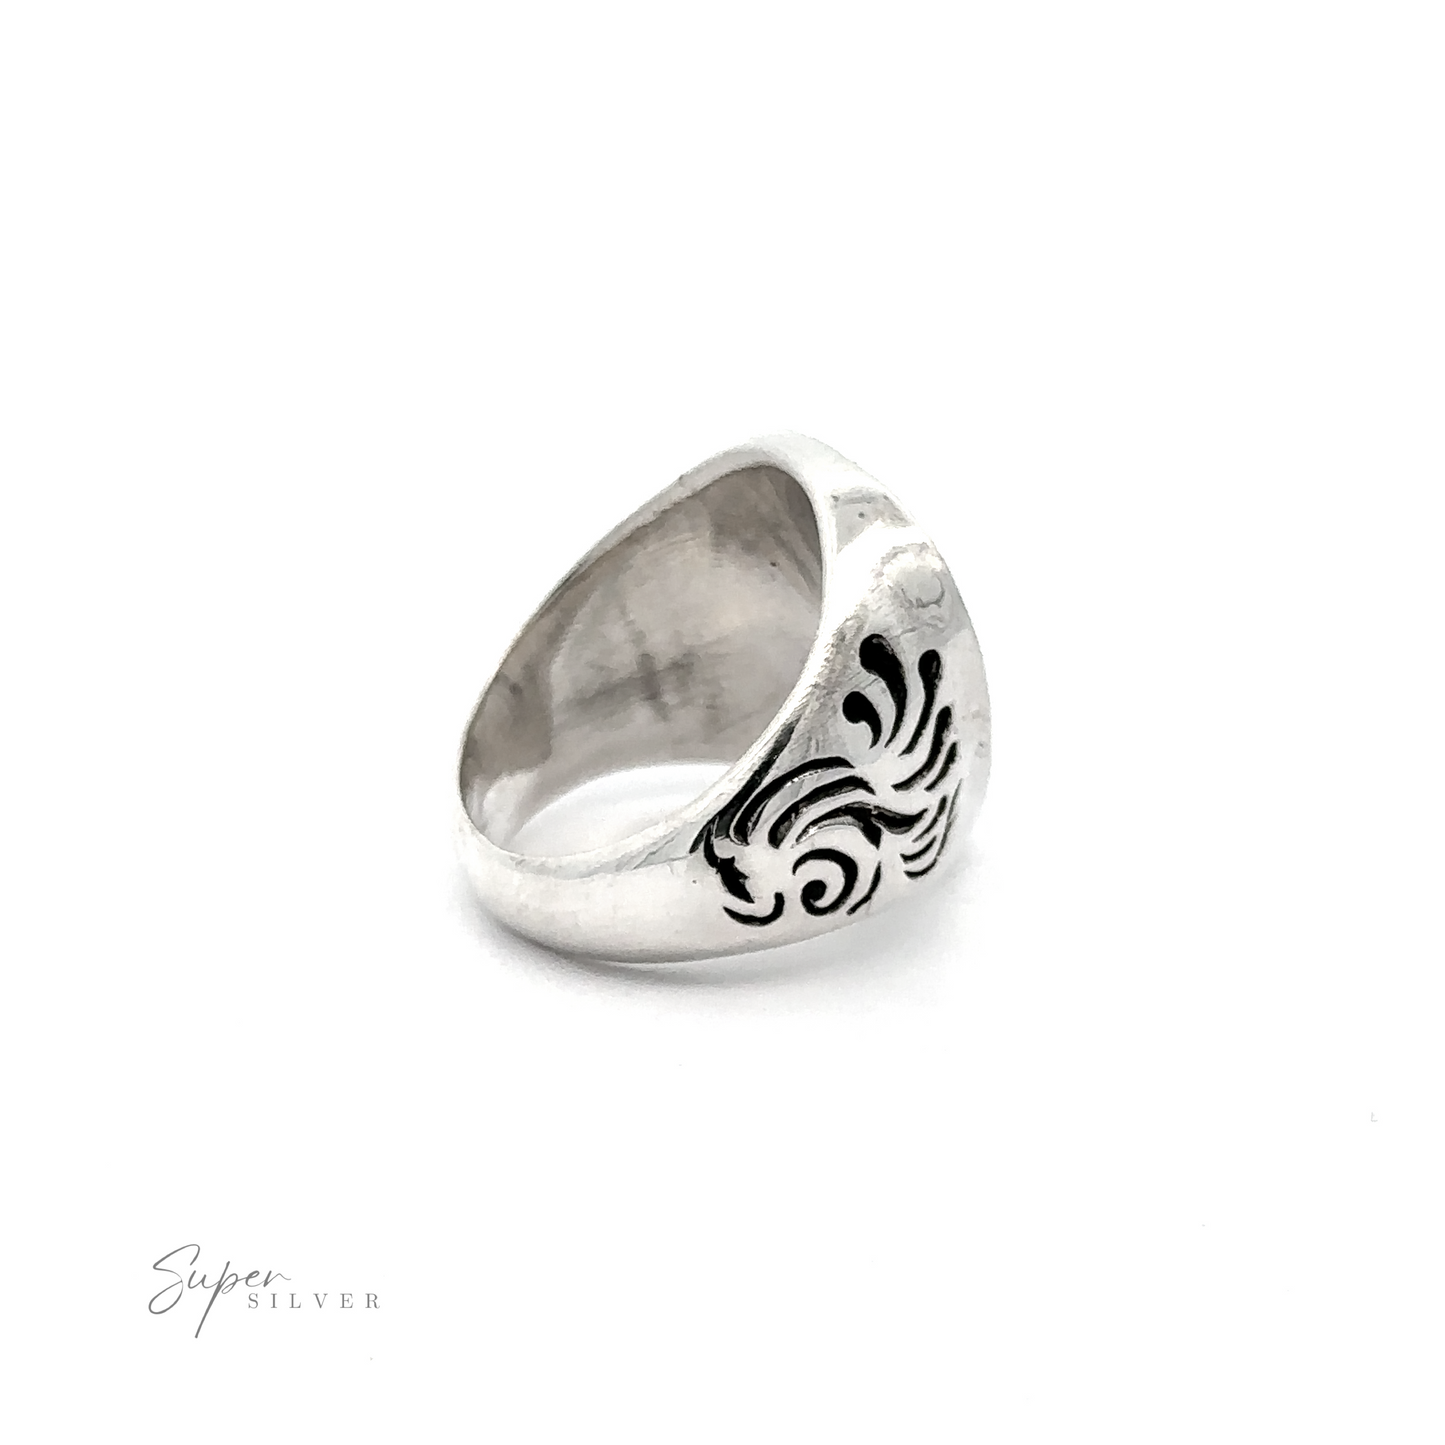 
                  
                    A heavy silver ring with guitar pick-shaped face features black engraved designs on a plain white background. The text "Guitar Pick Skull Ring" appears in the bottom left corner.
                  
                